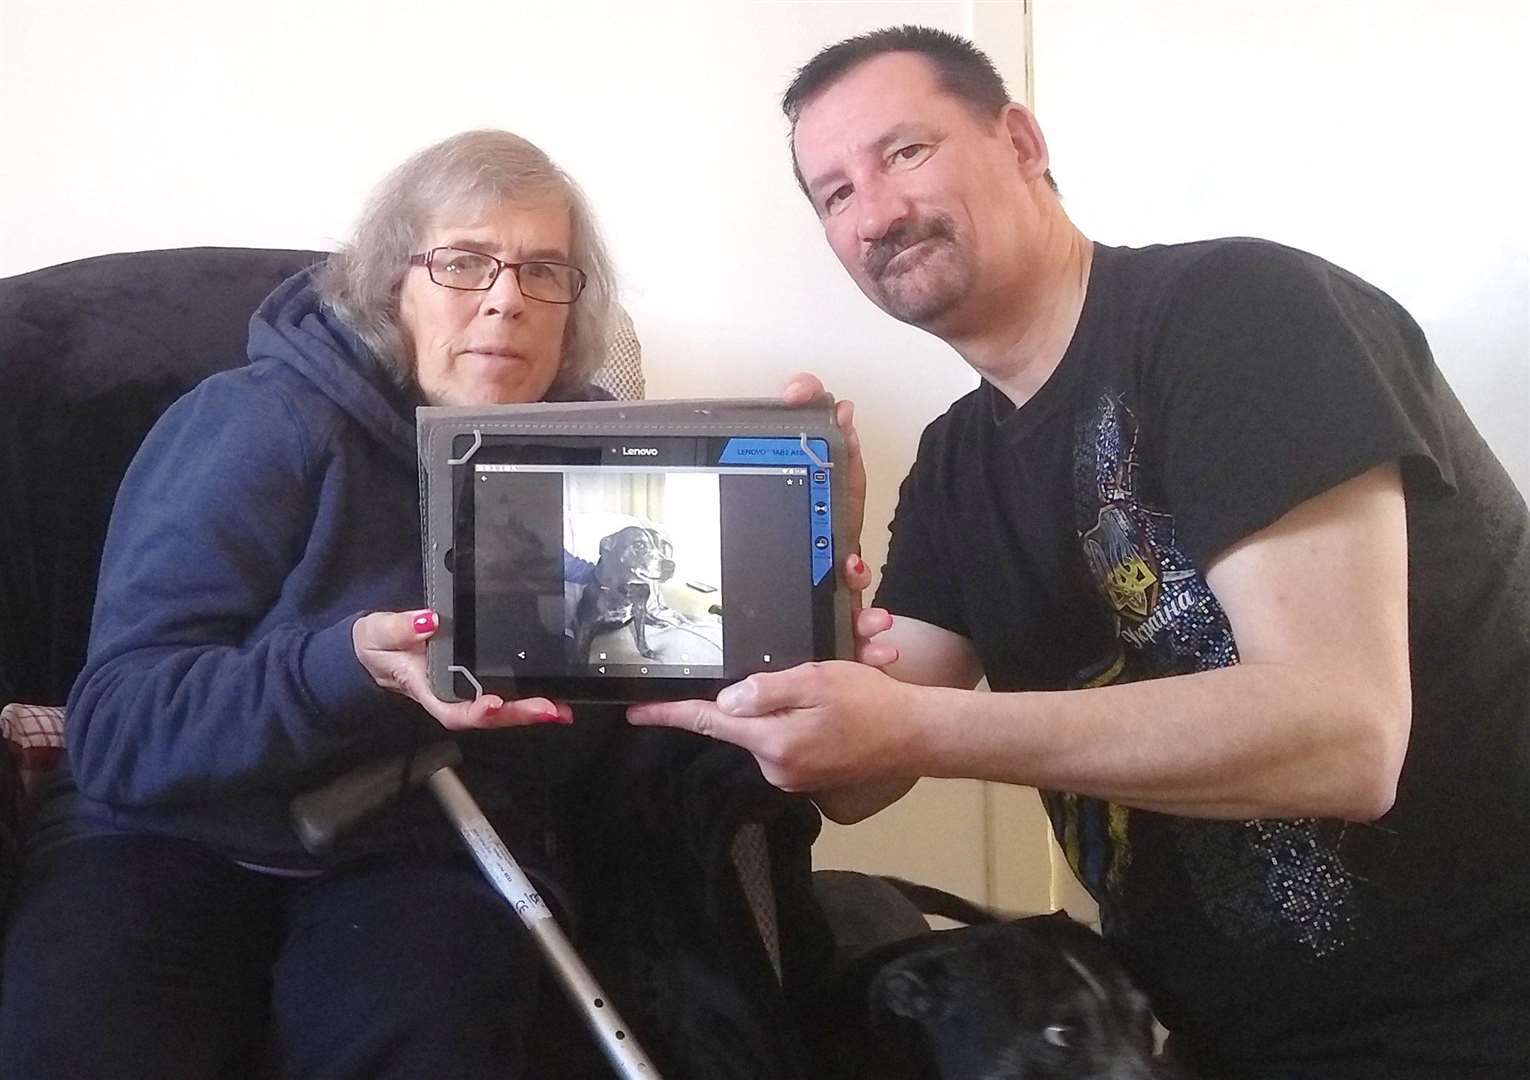 Jamie shows client Jenny from Thurso some basic computing skills such as taking photographs of her dog on a tablet device.